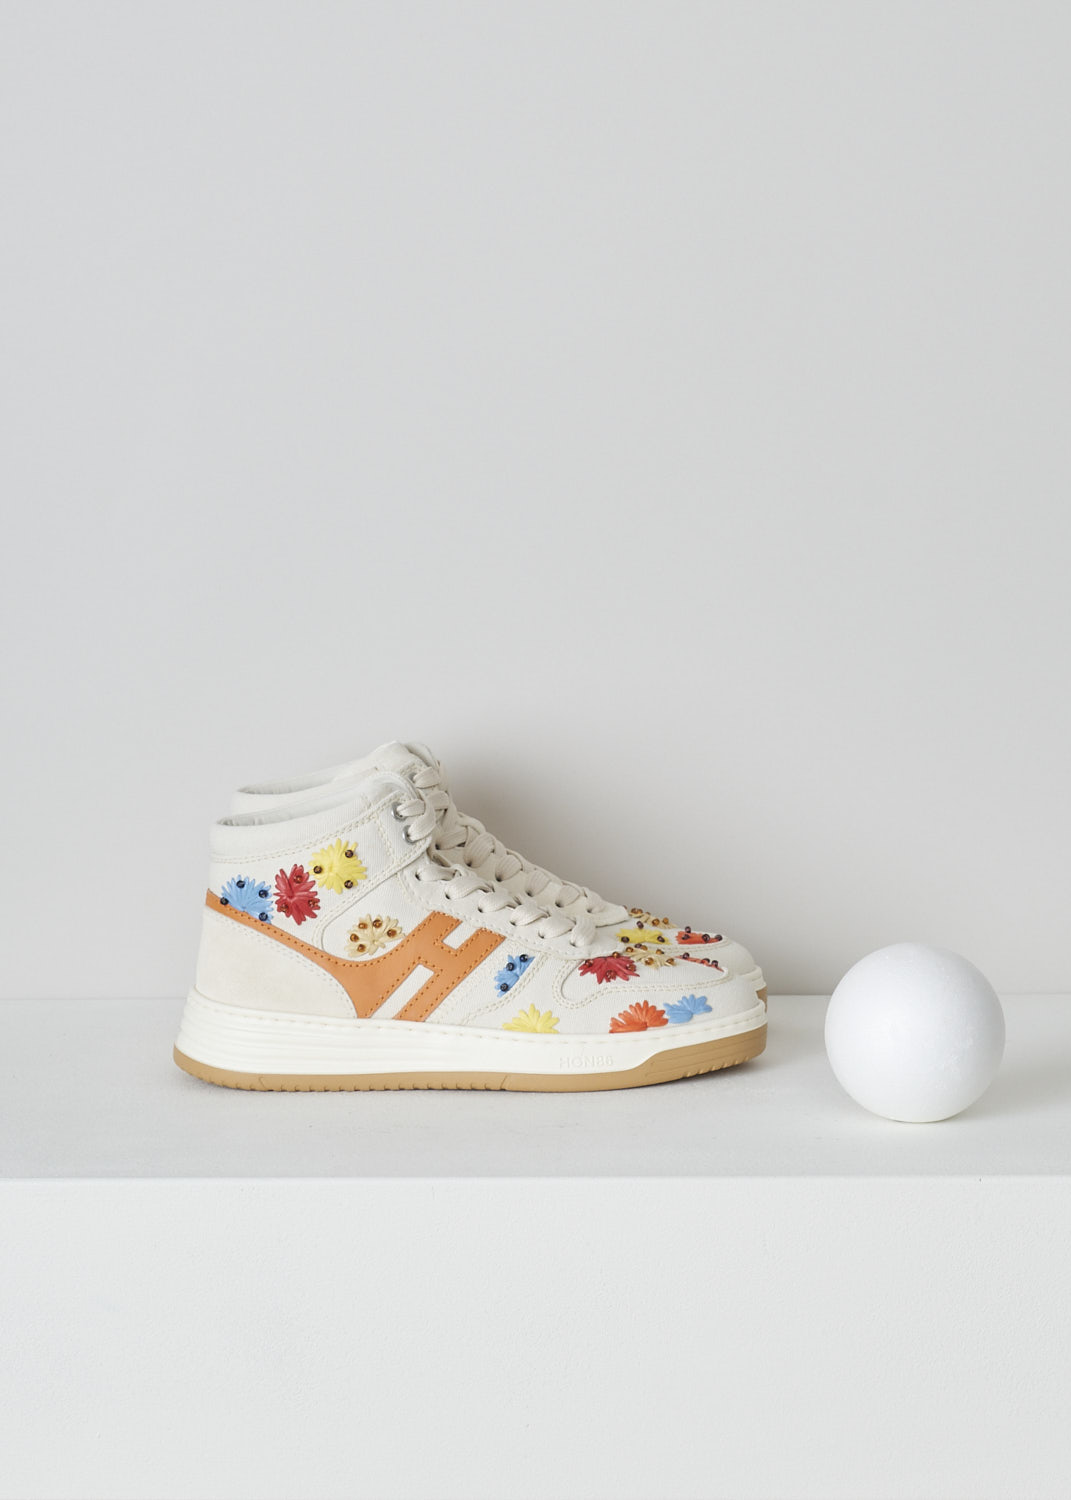 HOGAN, BEIGE HIGH TOP SNEAKERS WITH EMBROIDERY, GYW6300EZ10S530TA3_S53,  White, Orange, Red, Side, These high top sneakers have a front lace-up fastening. The sneakers have a beige canvas base with multicolored embroidered flowers. These flowers are further decorated with beads. On the sides, the brand's H-logo has been incorporated in the design in orange. These sneakers have  thick rubber soles. 

